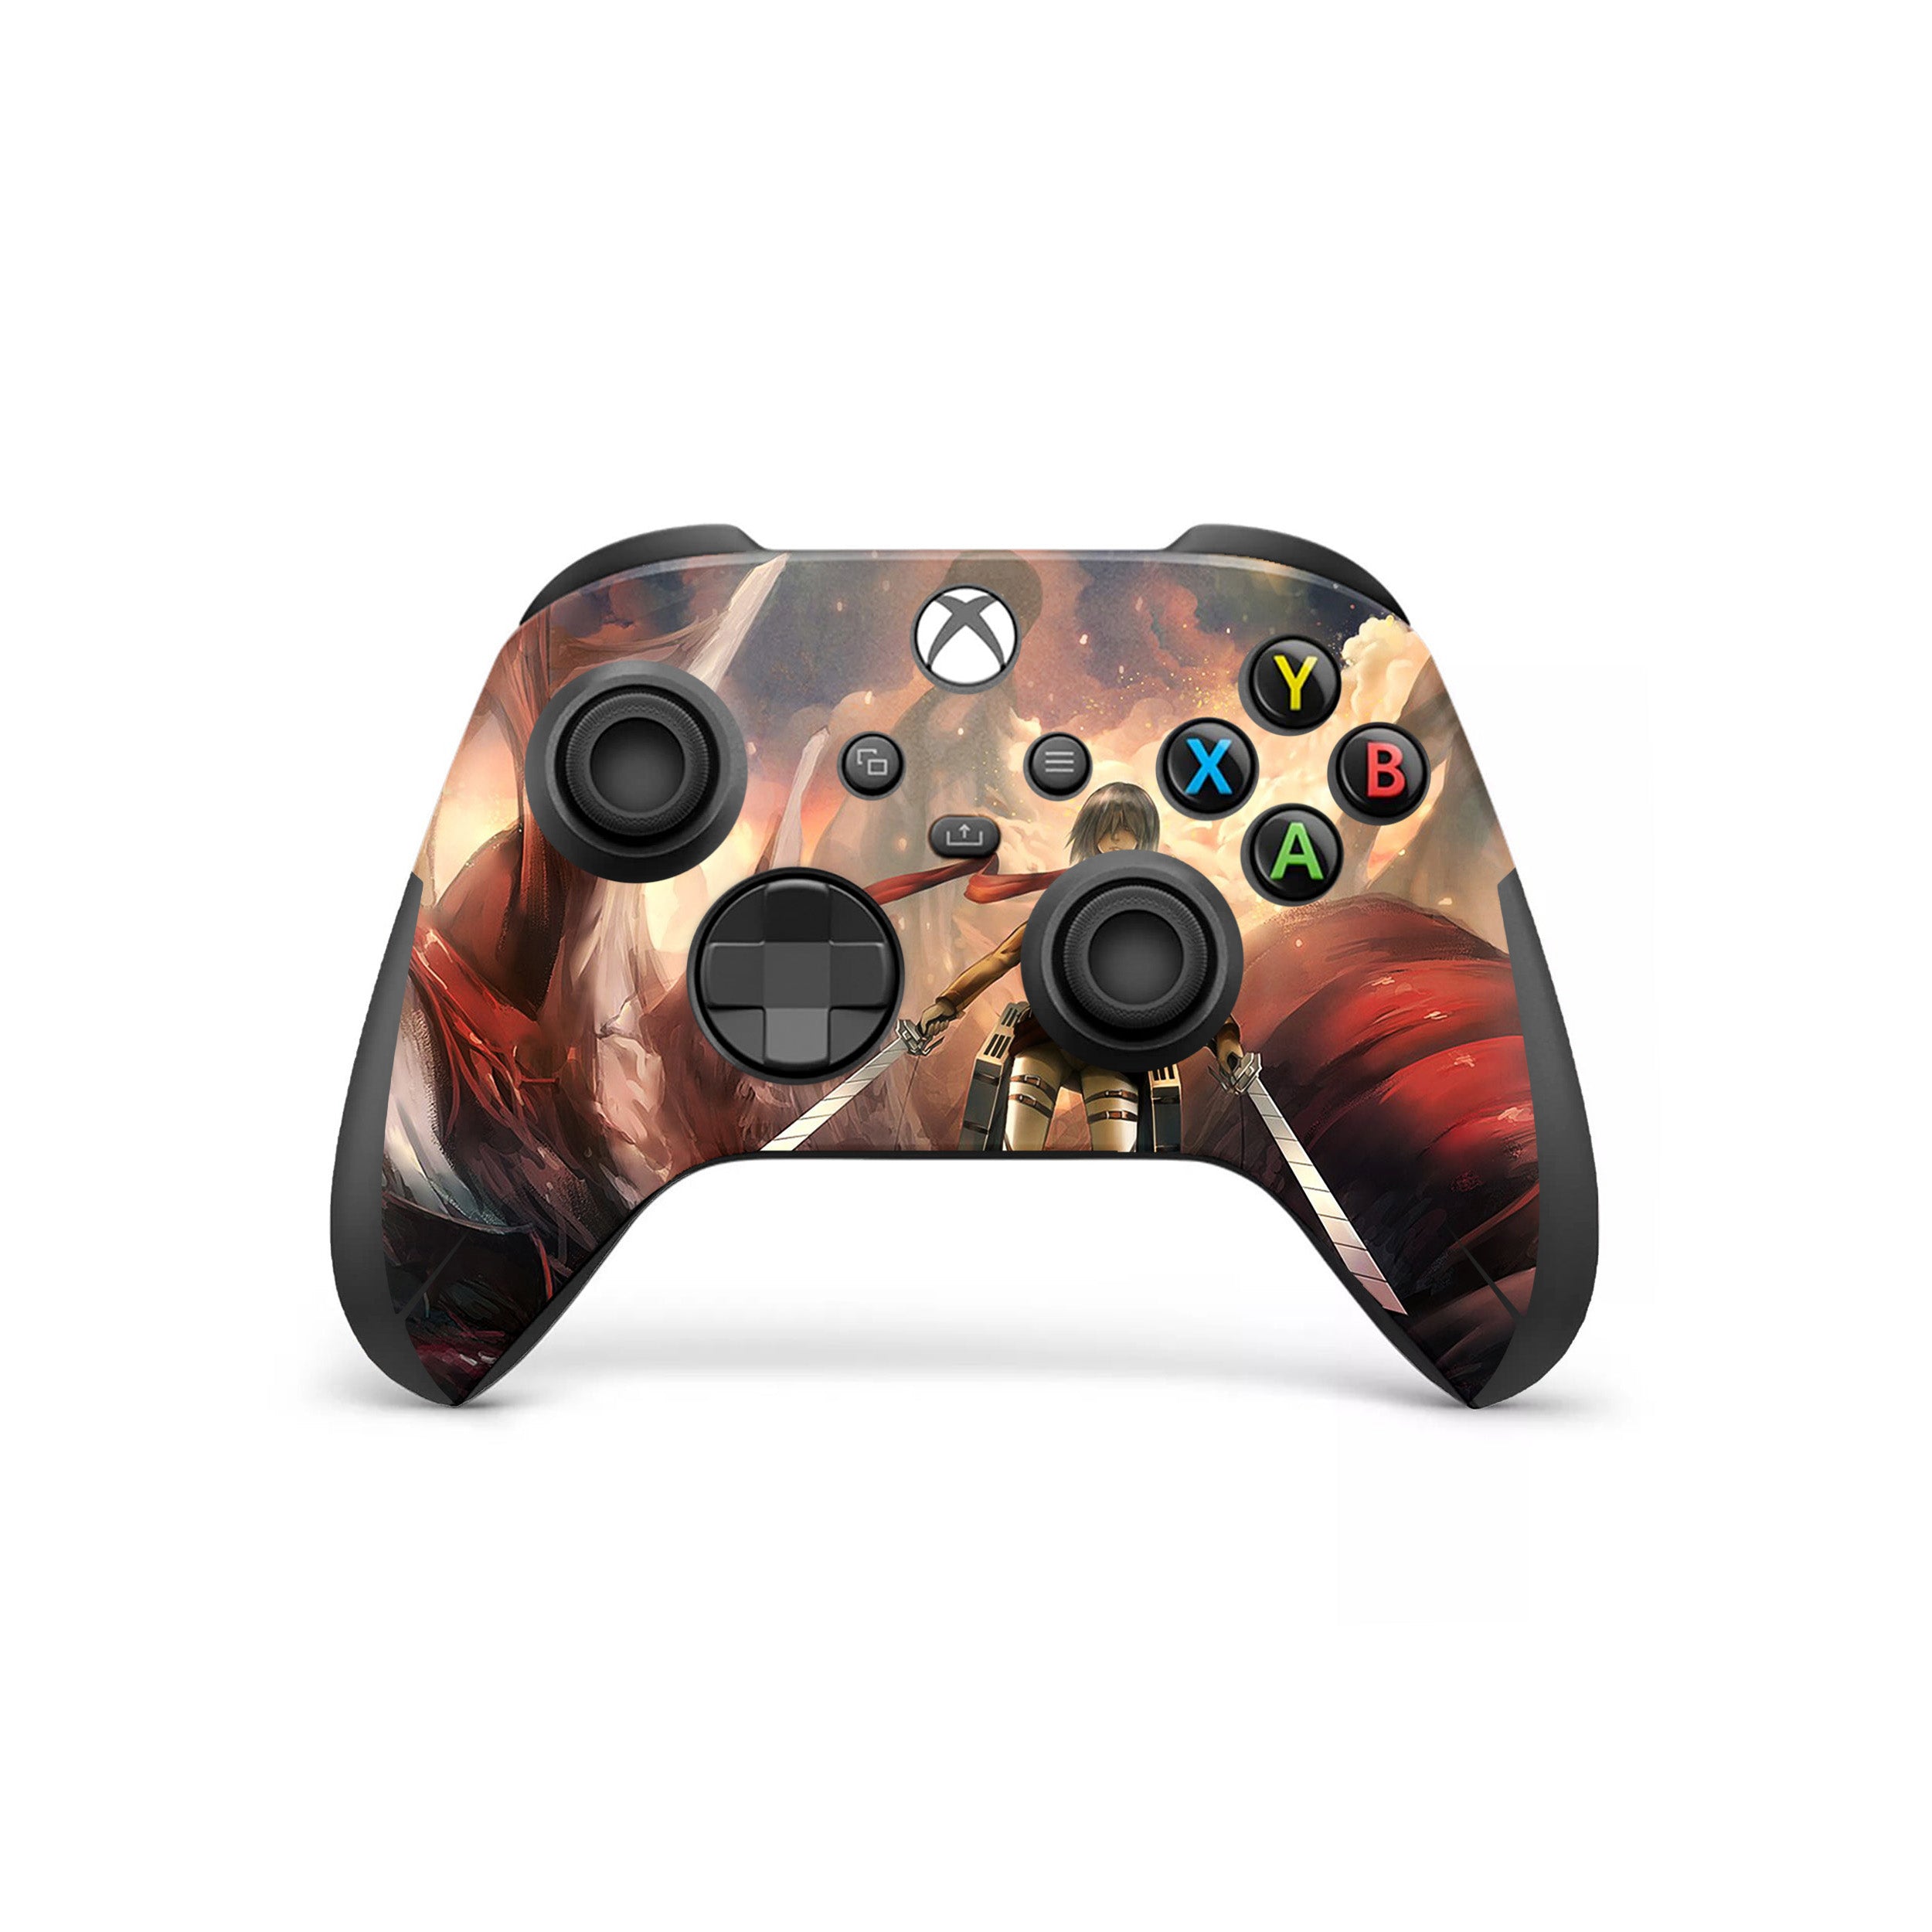 A video game skin featuring a Attack On Titan Mikasa Ackerman design for the Xbox Wireless Controller.